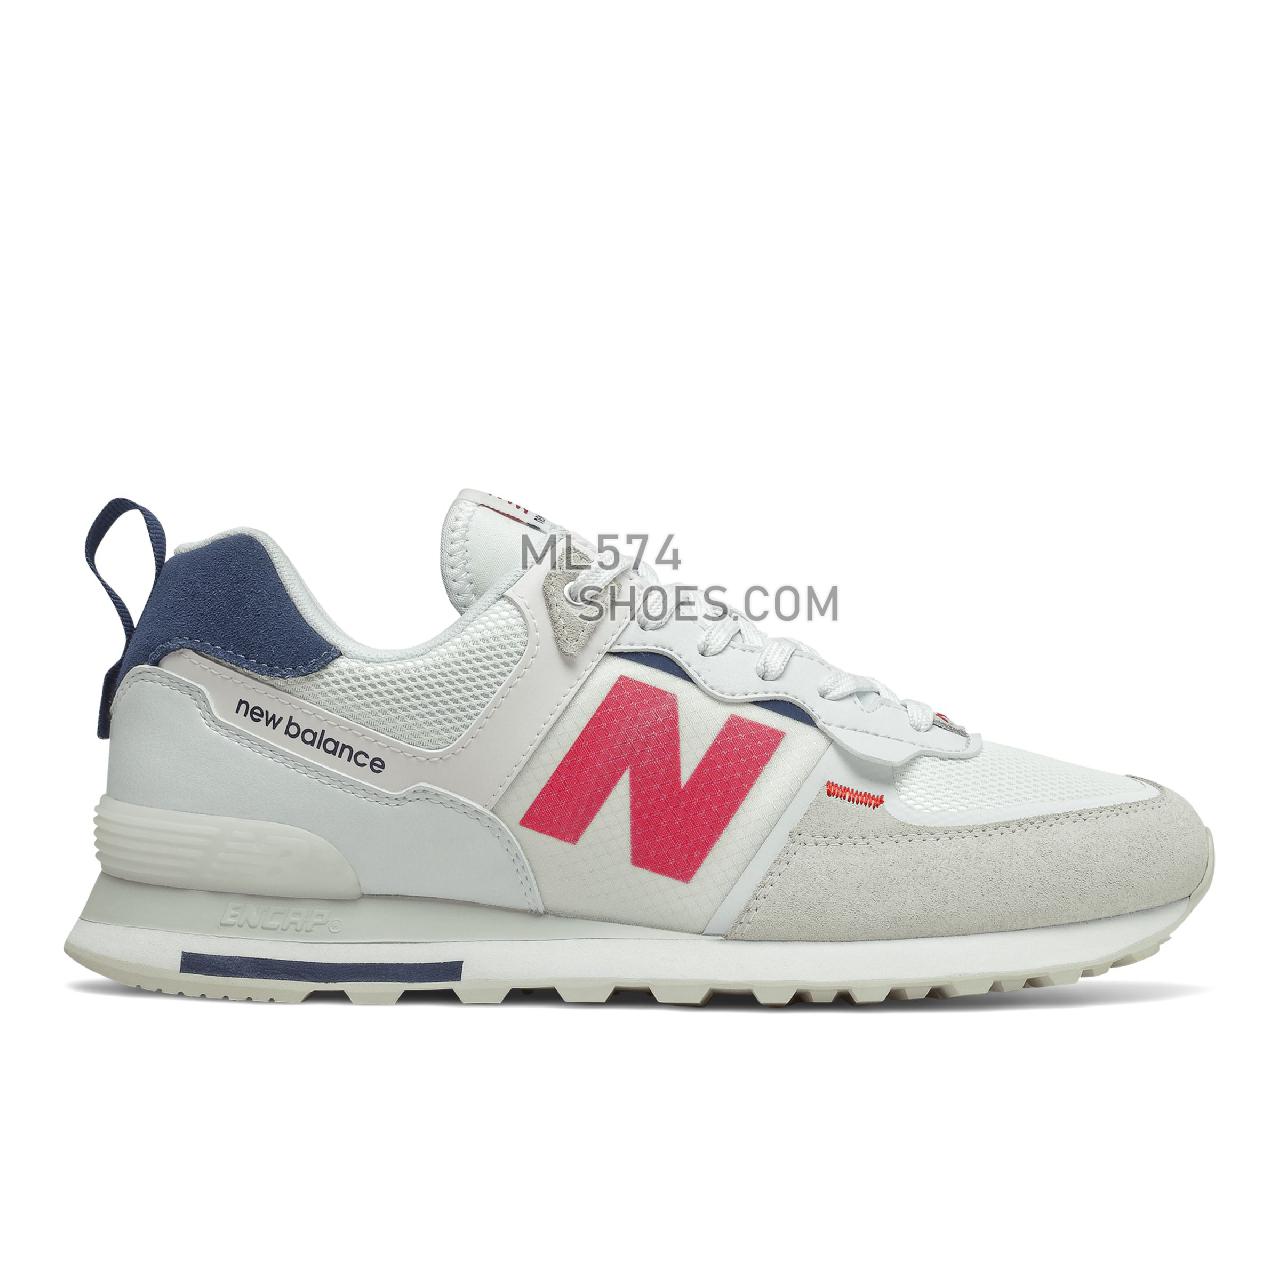 New Balance 574 - Men's Classic Sneakers - White with Natural Indigo - ML574IST